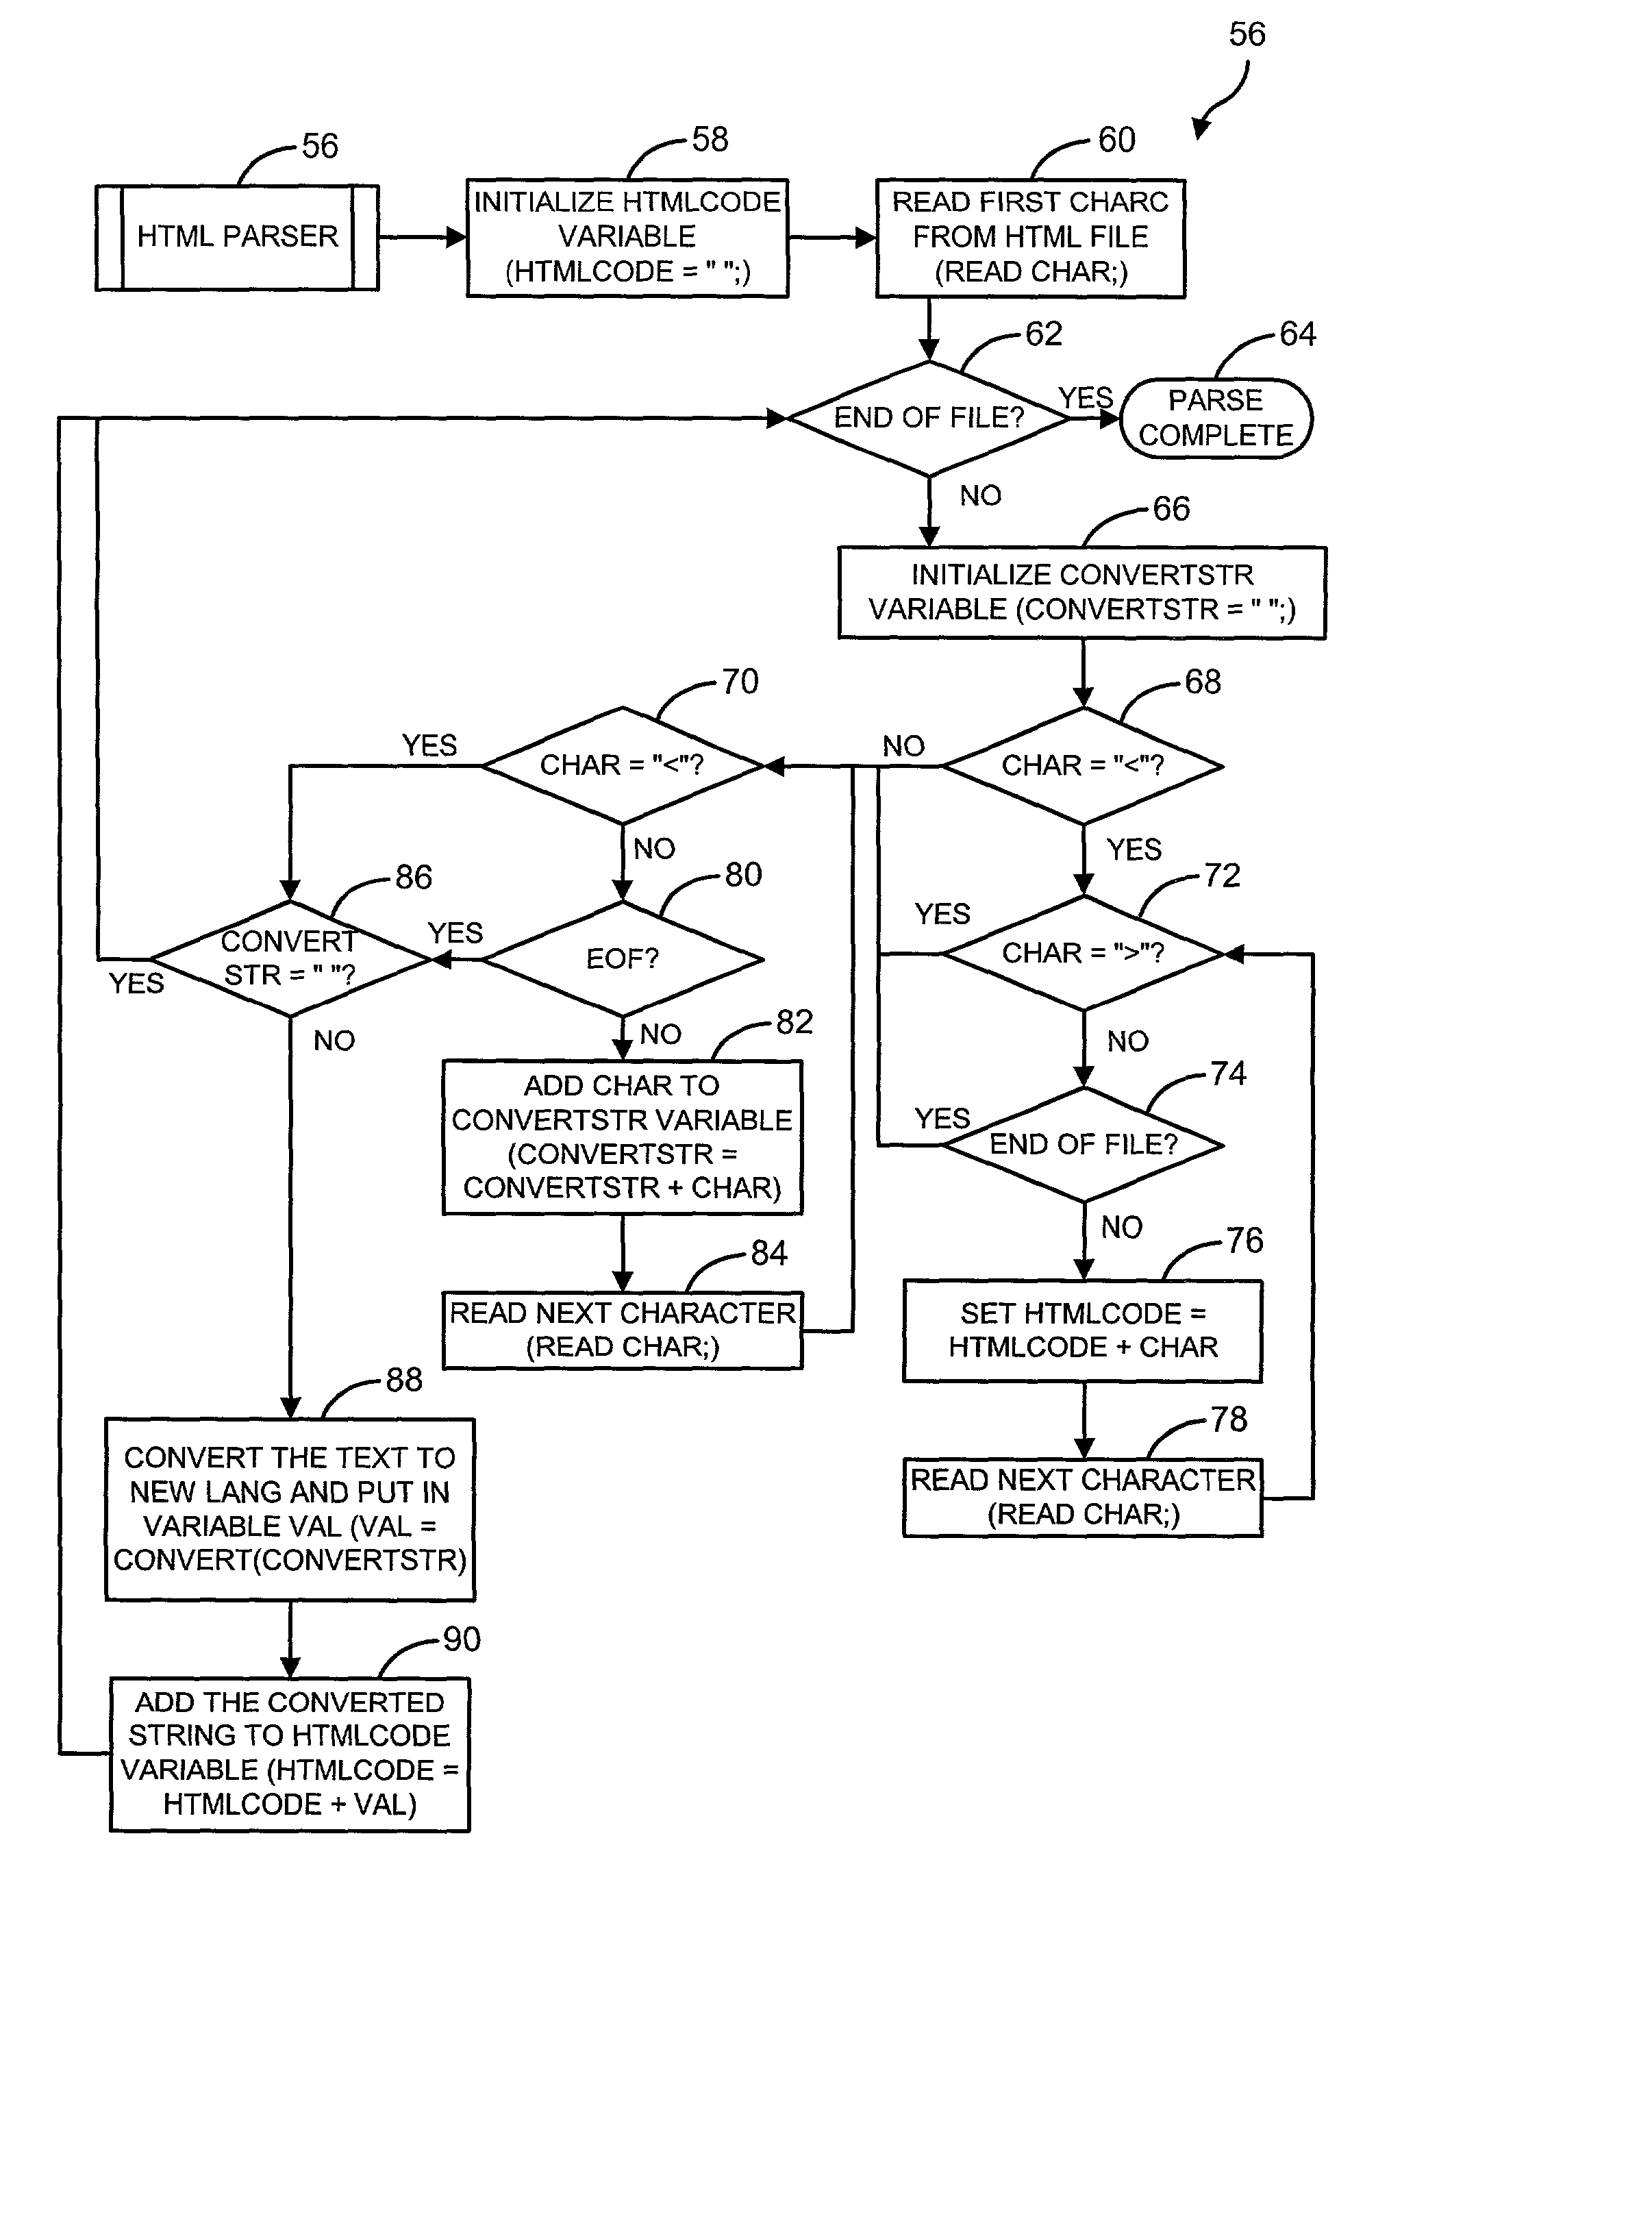 System and method for converting a standard generalized markup language in multiple languages